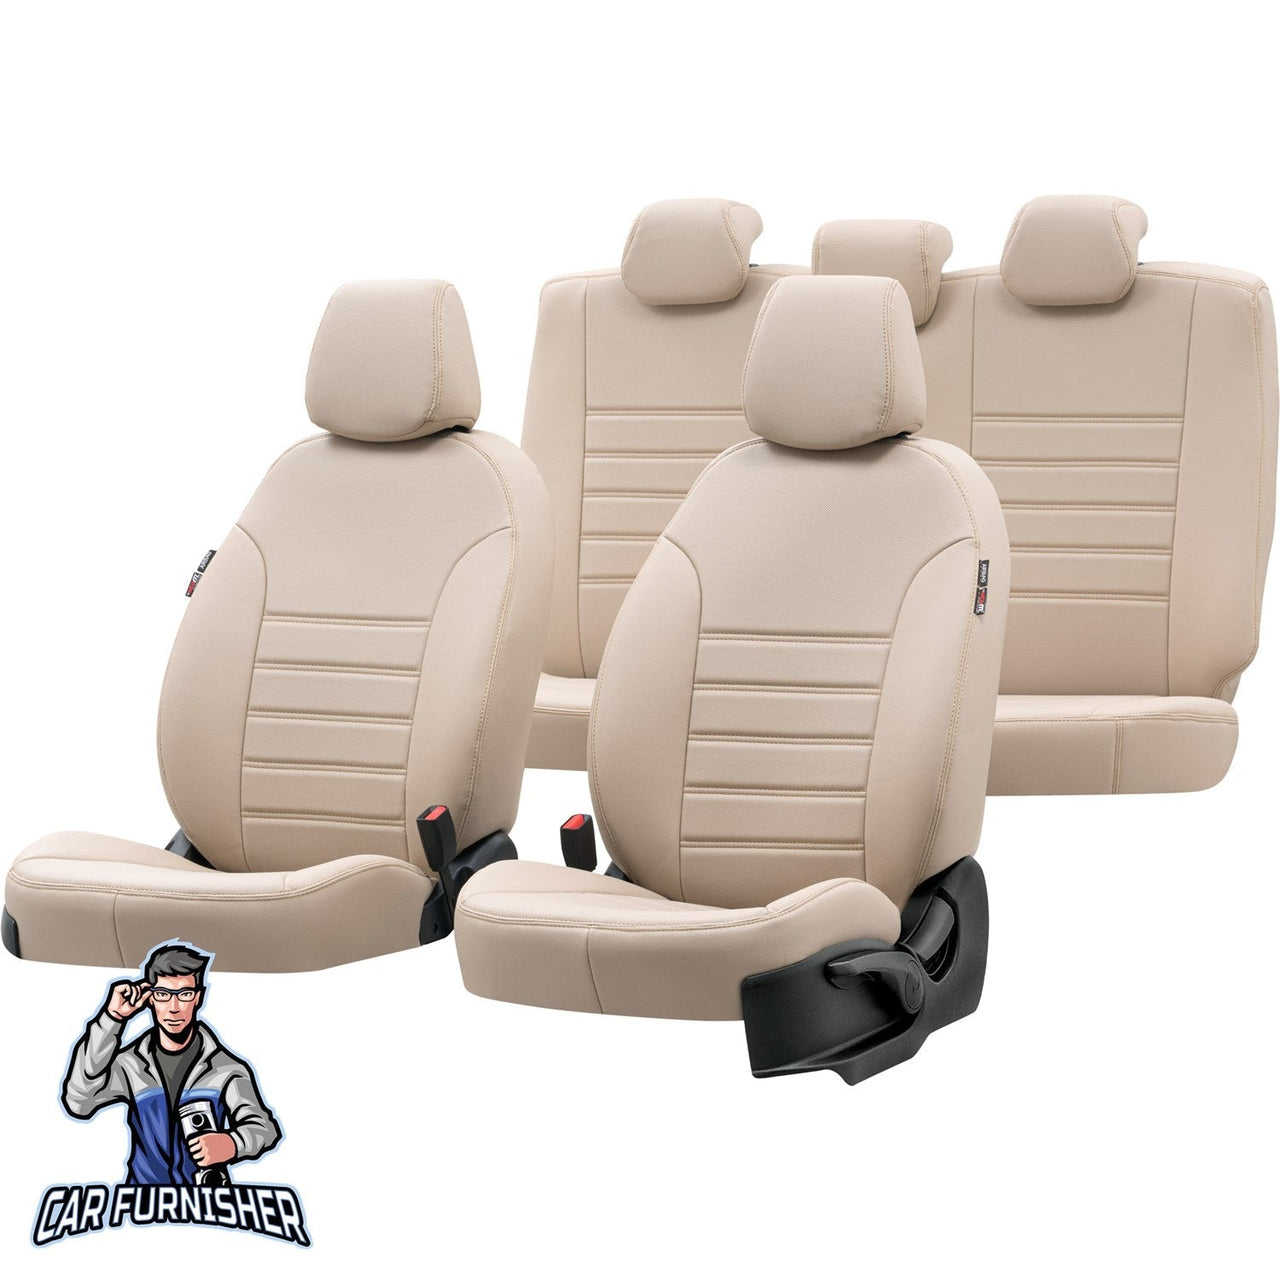 Subaru Forester Seat Cover Istanbul Leather Design Beige Leather